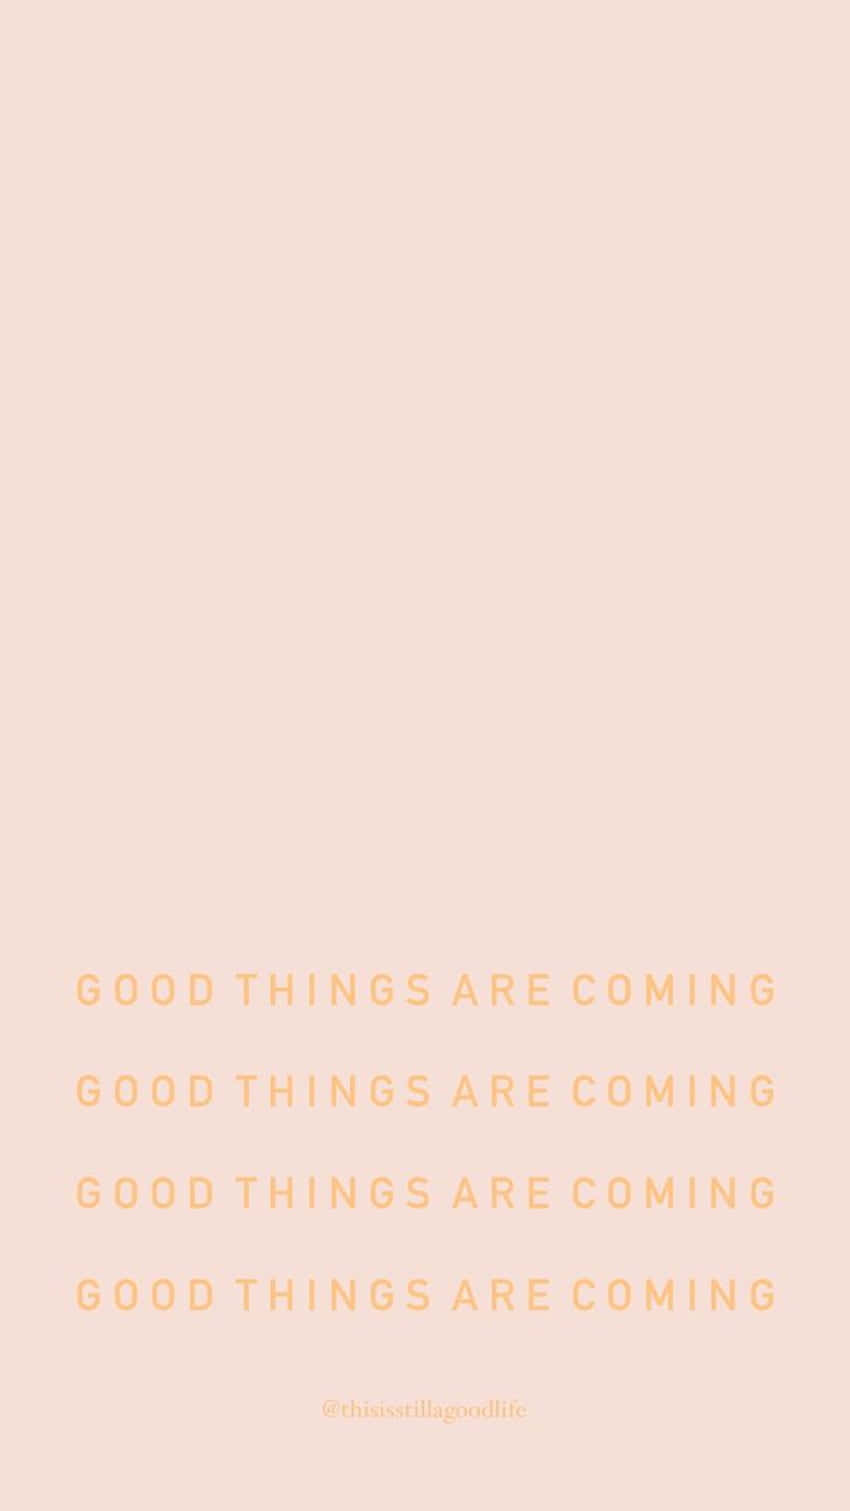 Good Things Are Coming - A Quote On A Pink Background Wallpaper